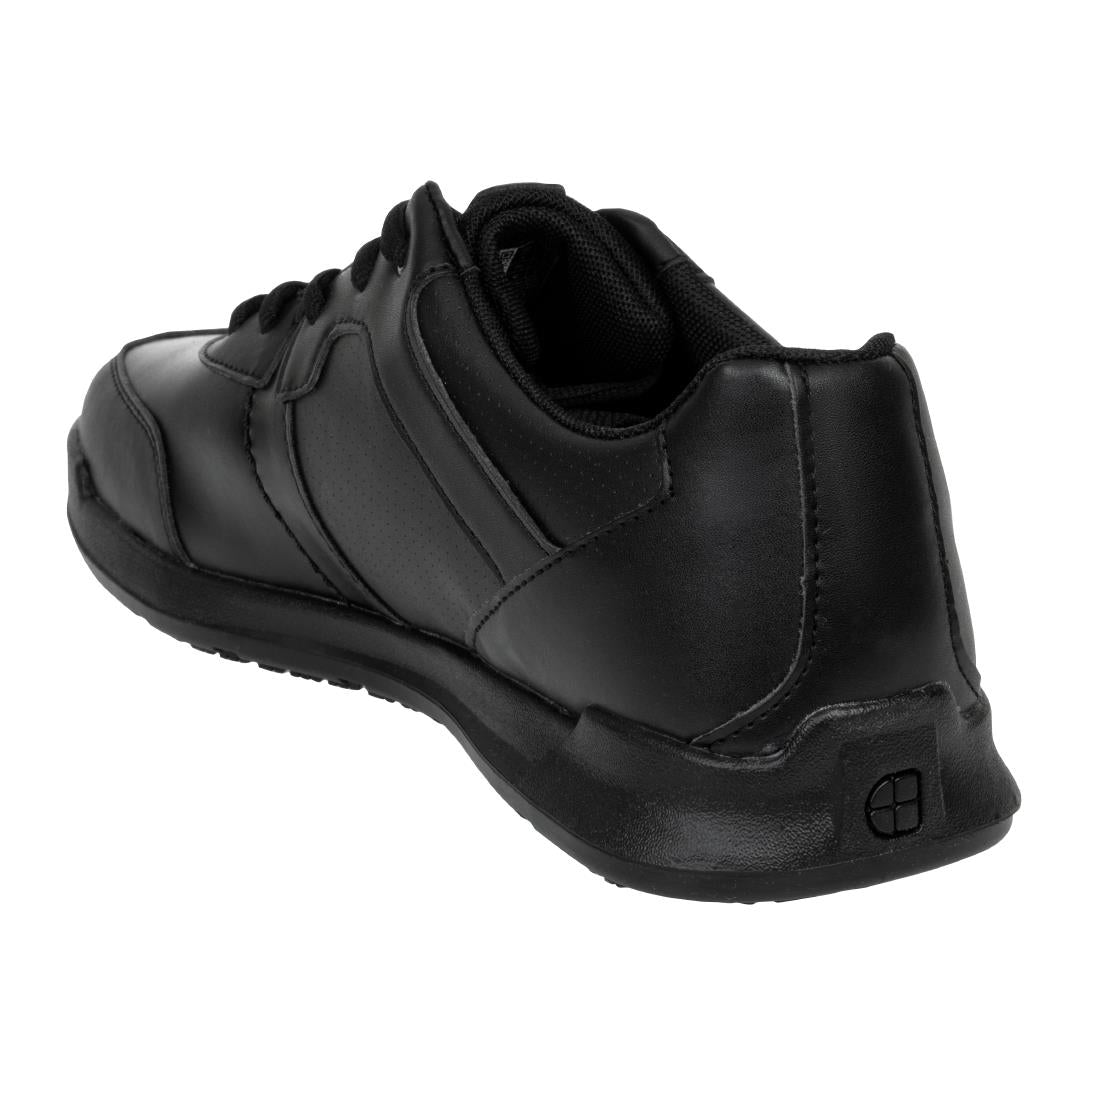 BB585-42 Shoes for Crews Freestyle Trainers Black Size 42